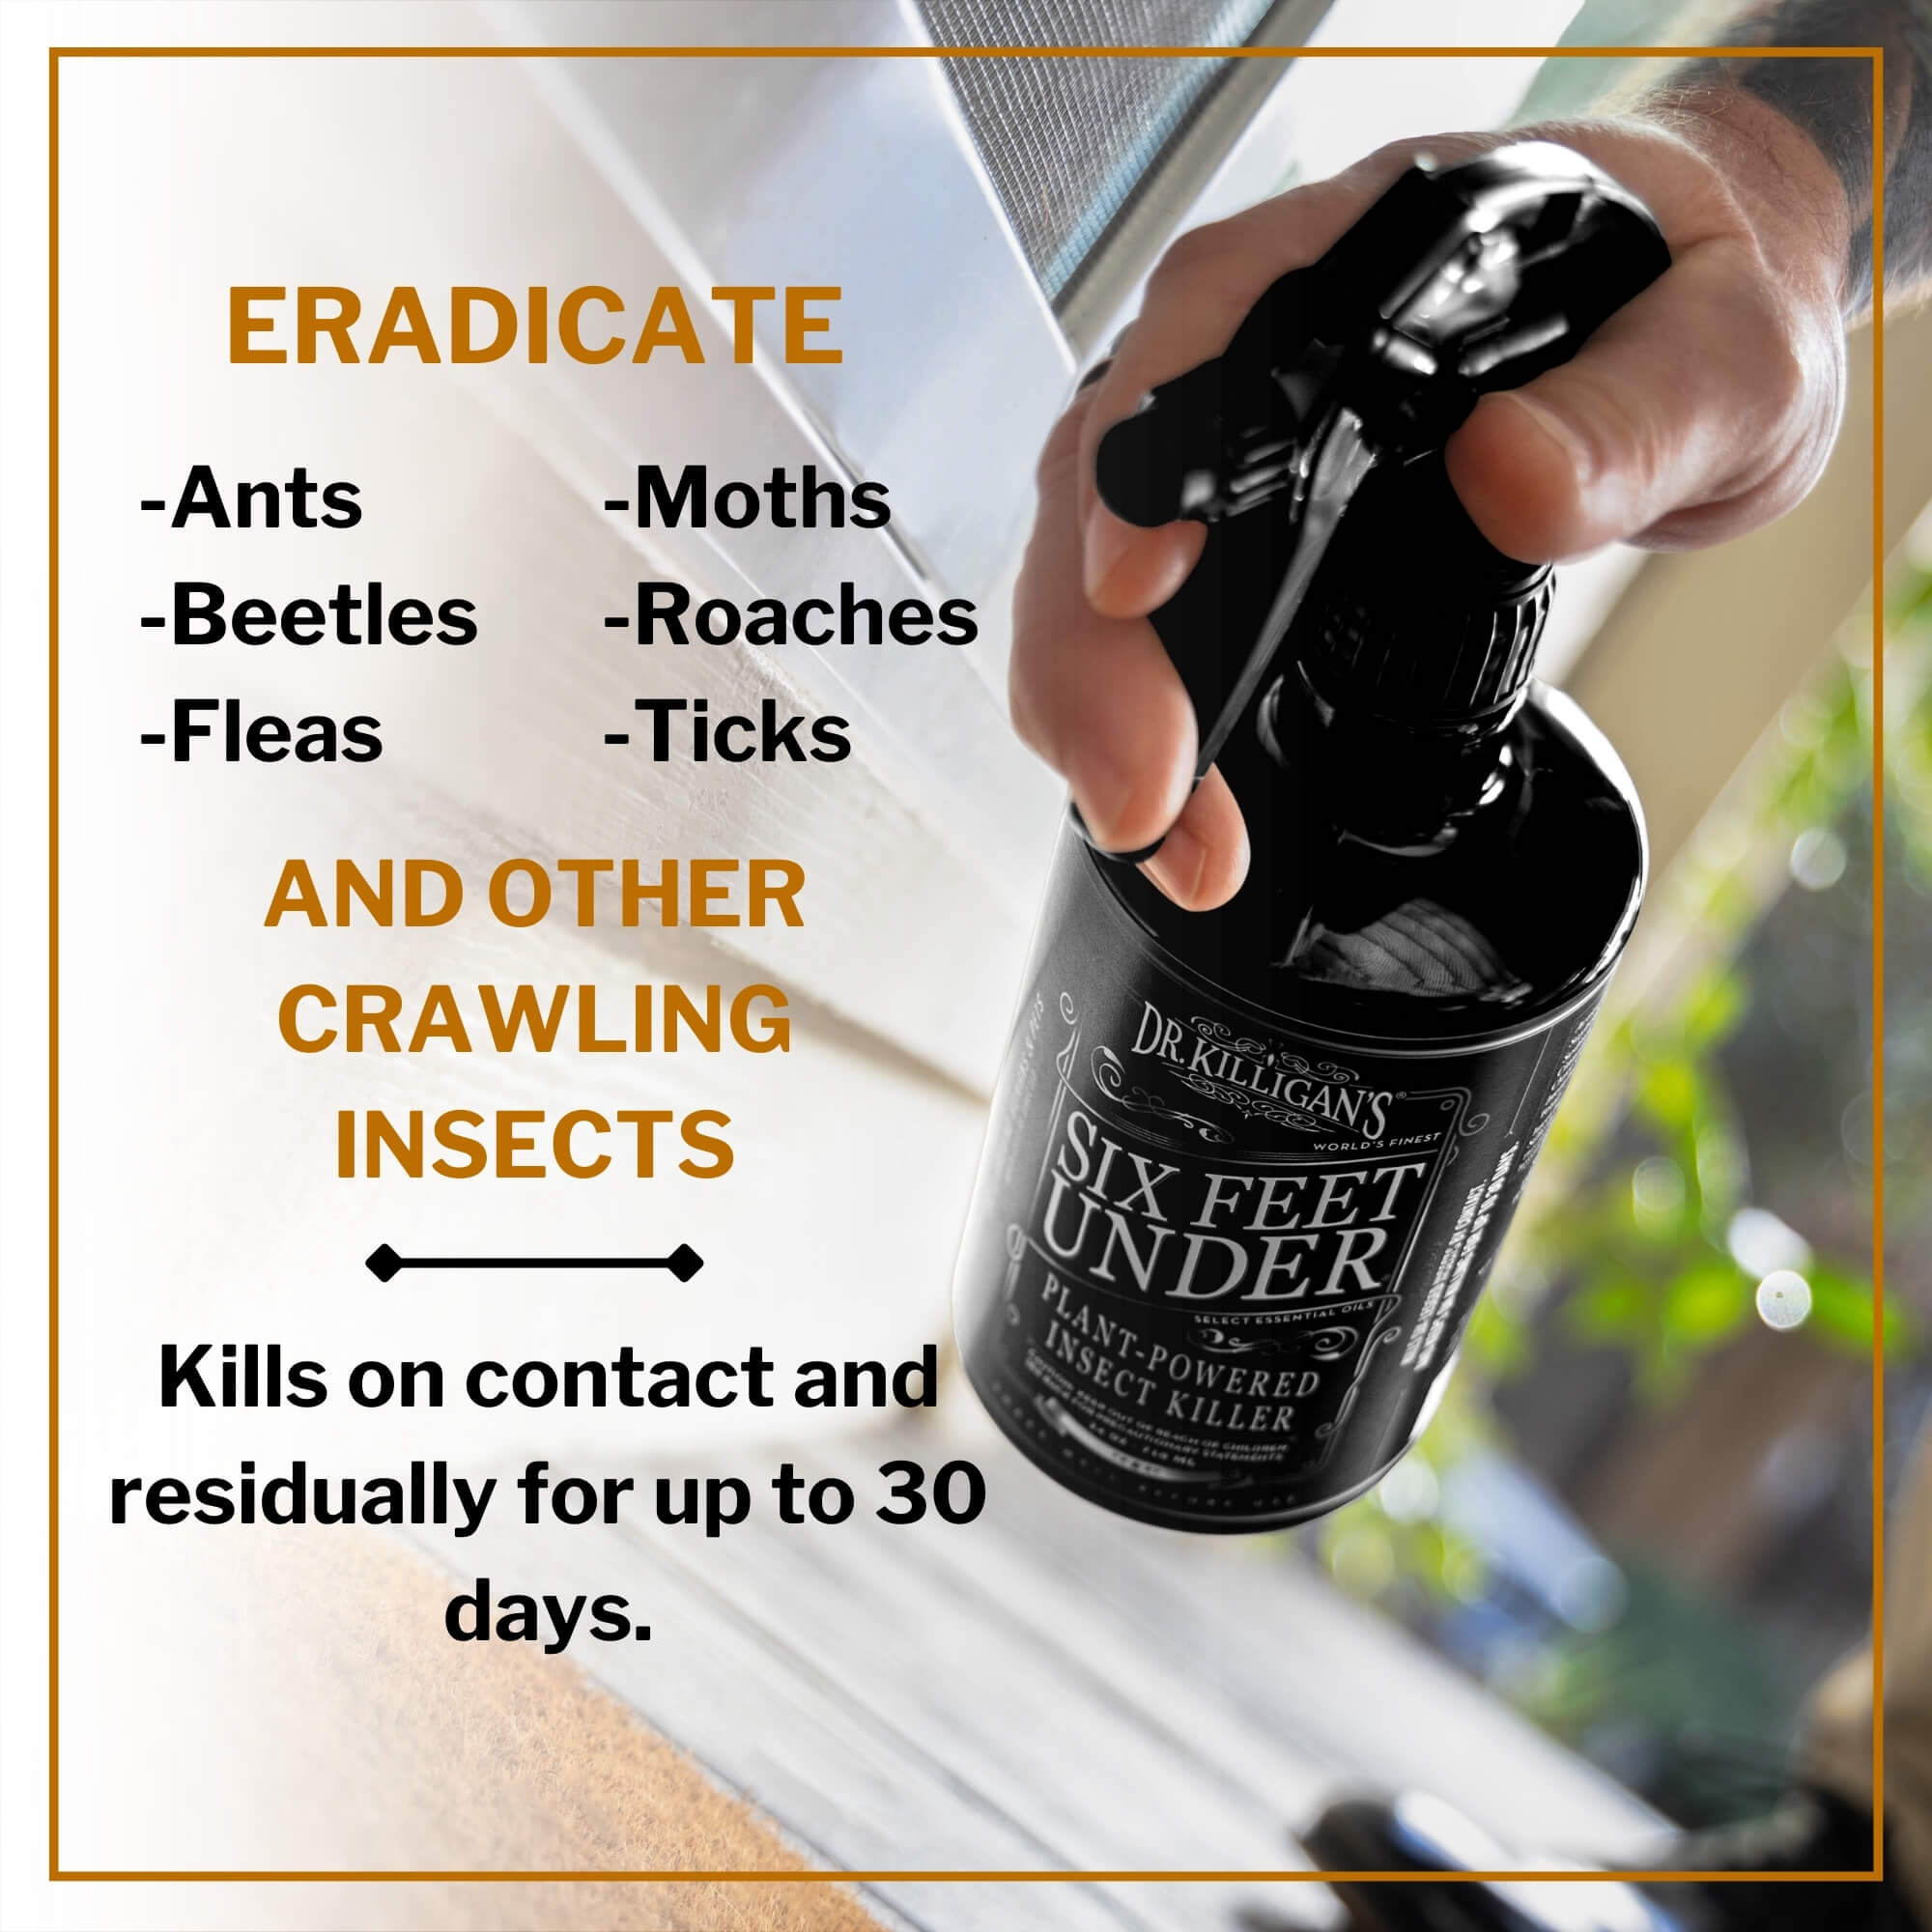 Six Feet Under Plant-Powered Insect Spray